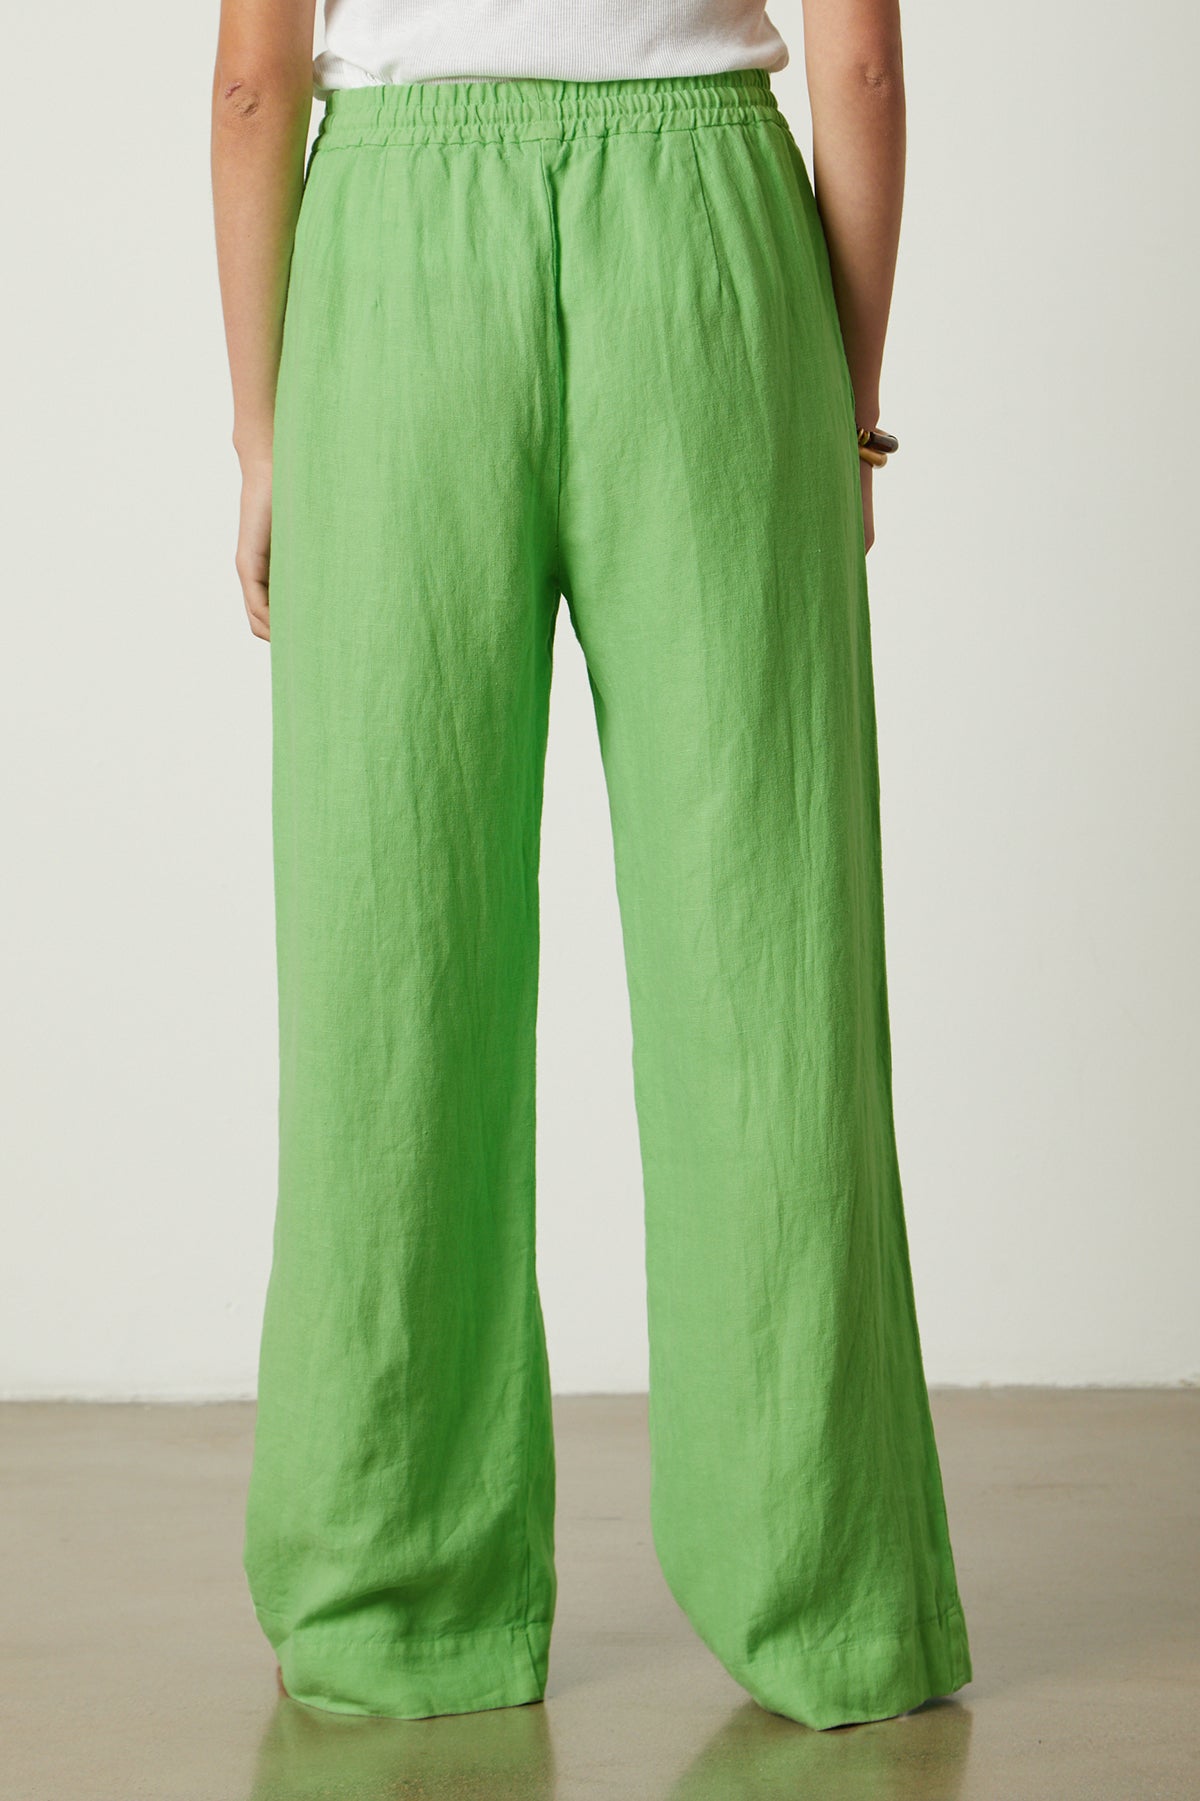   The back view of a woman wearing Velvet by Graham & Spencer's GWYNETH HEAVY LINEN PANT. 